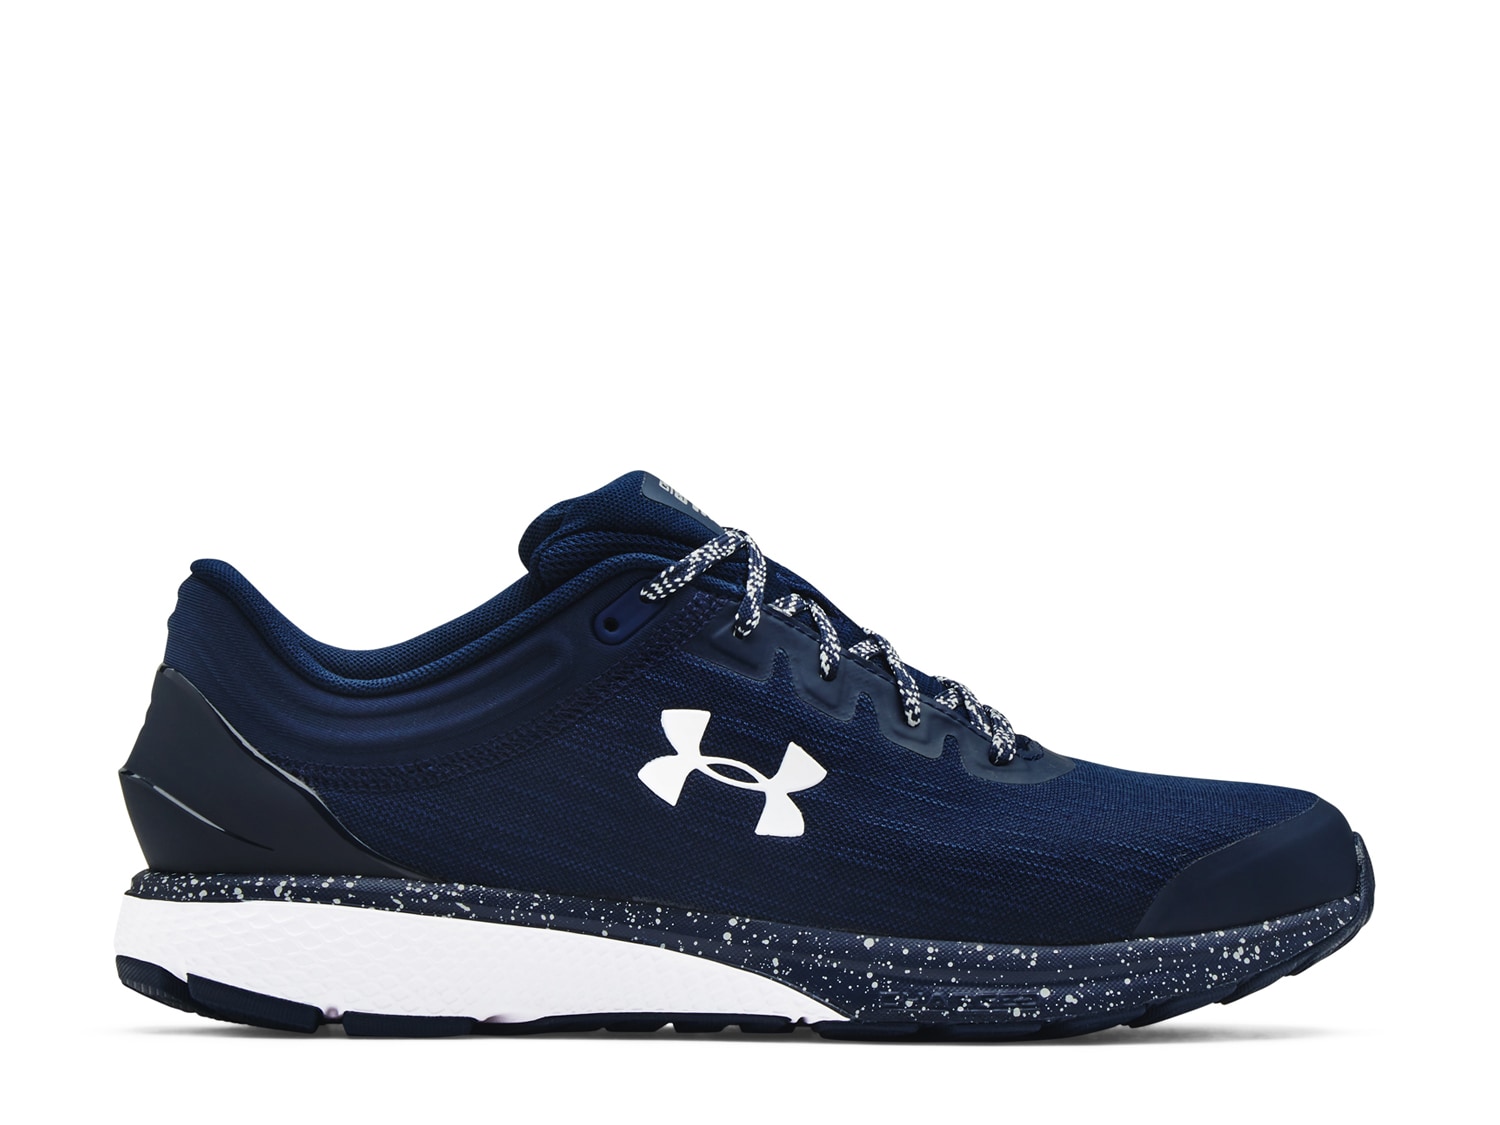 Under Armour Charged Escape 3, review and details